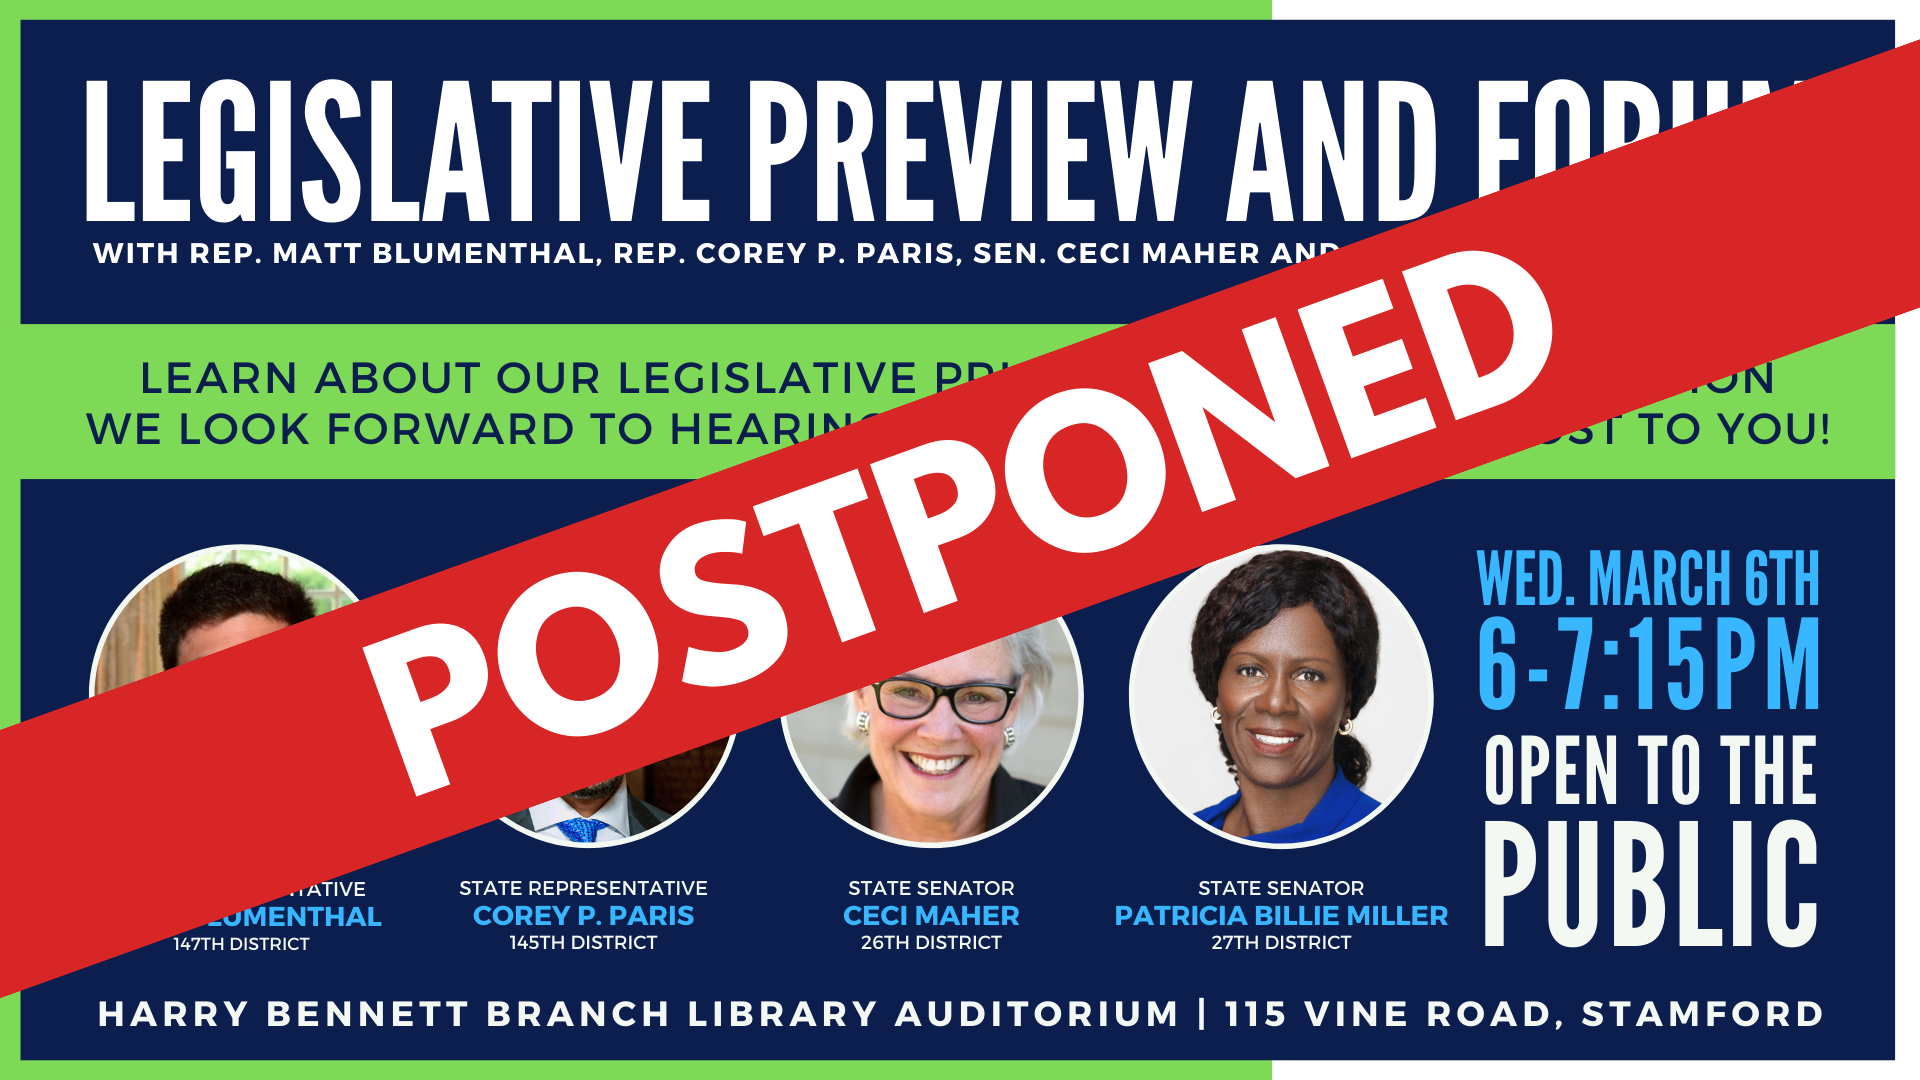 The legislative preview and forum scheduled for March 6 has been postponed to a later date (yet to be determined).